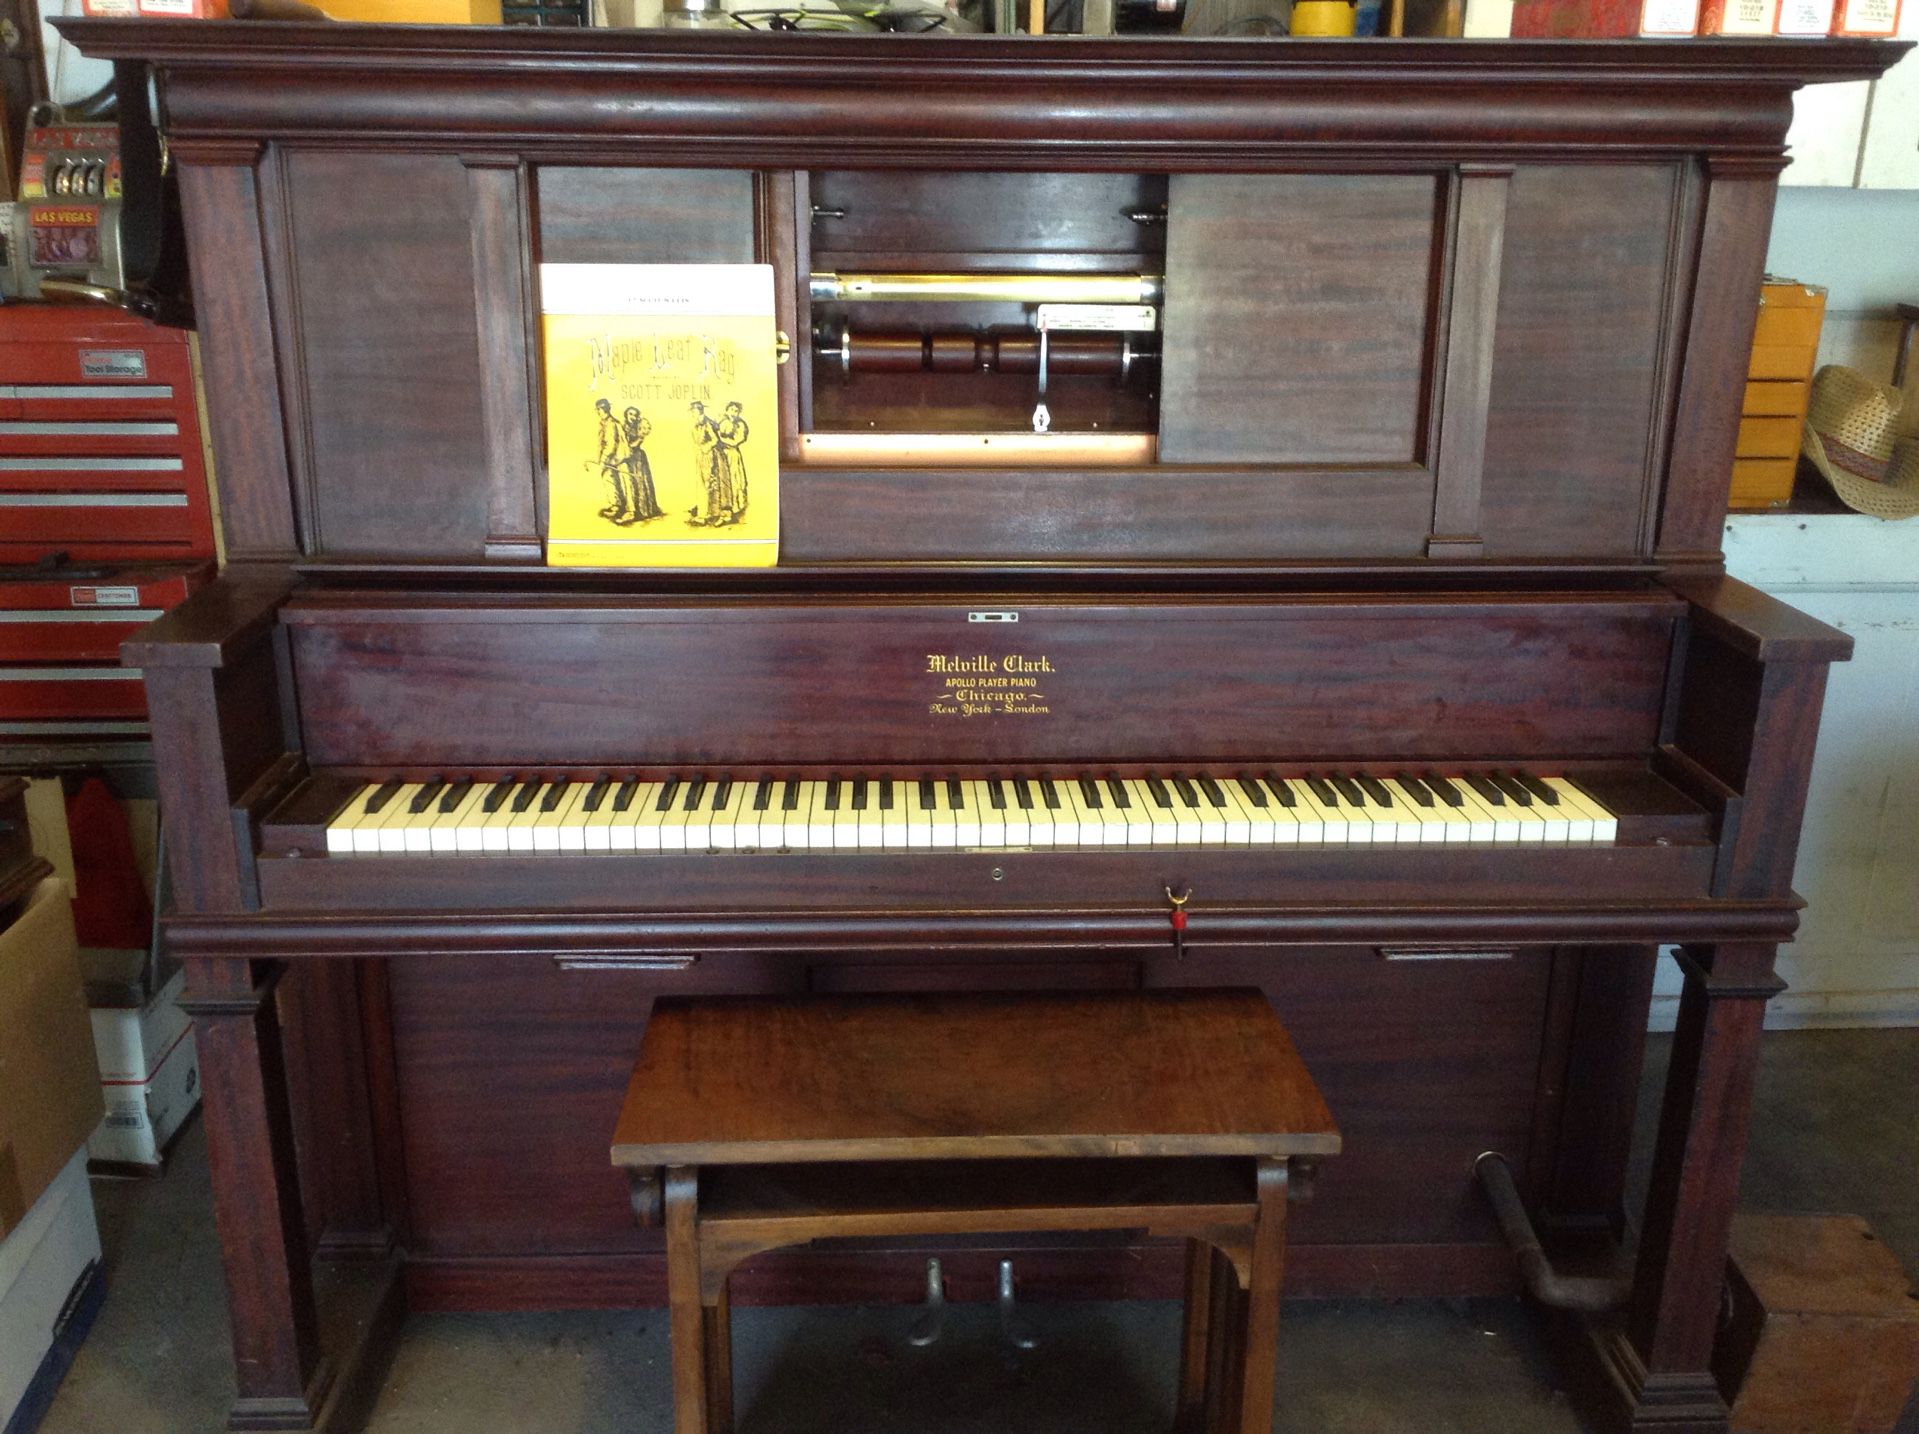 Melville Clark player piano in good working condition, Circa late 1800s With lots of rolls, The player works and bellows have been rebuilt.